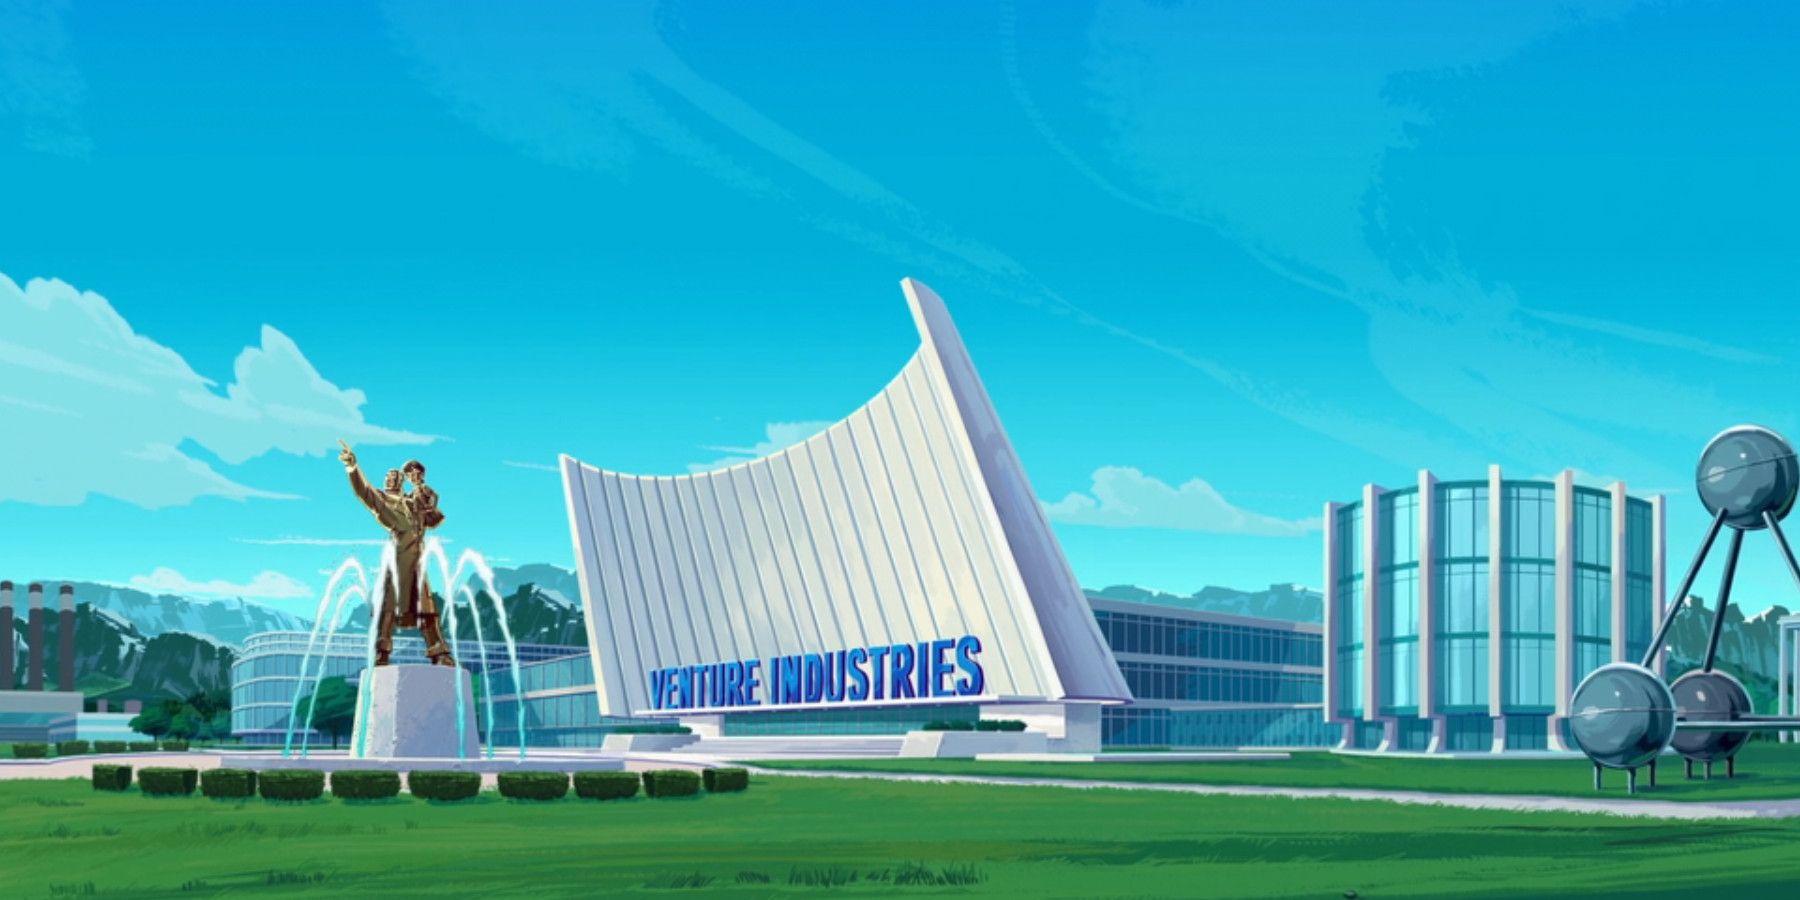 Venture Industries Compound from The Venture Bros. Movie